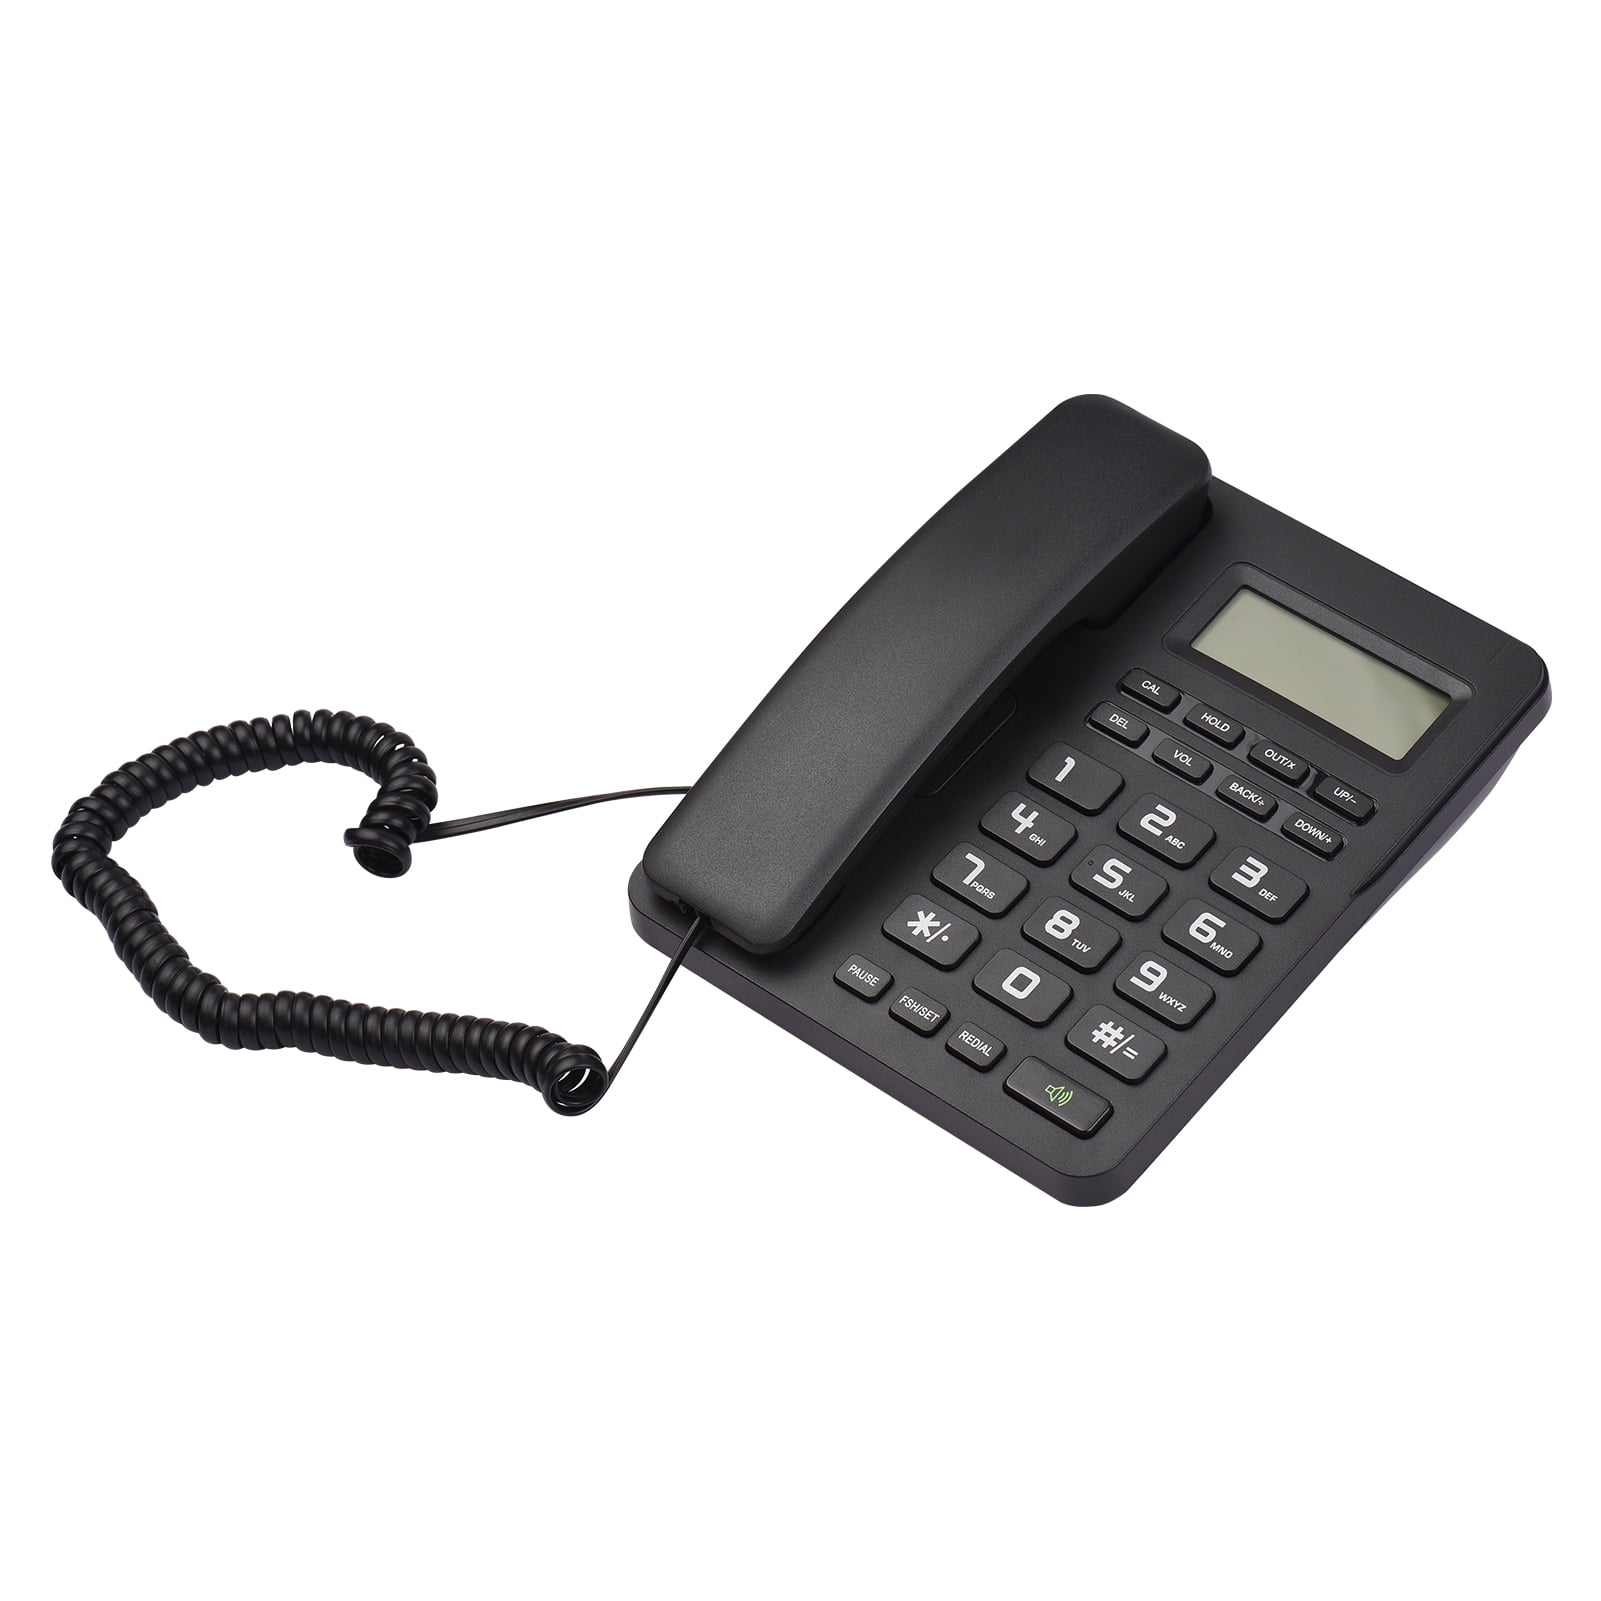 White Beetel M71 Landline Phone, For Office at Rs 1250 in New Delhi | ID:  26161319491